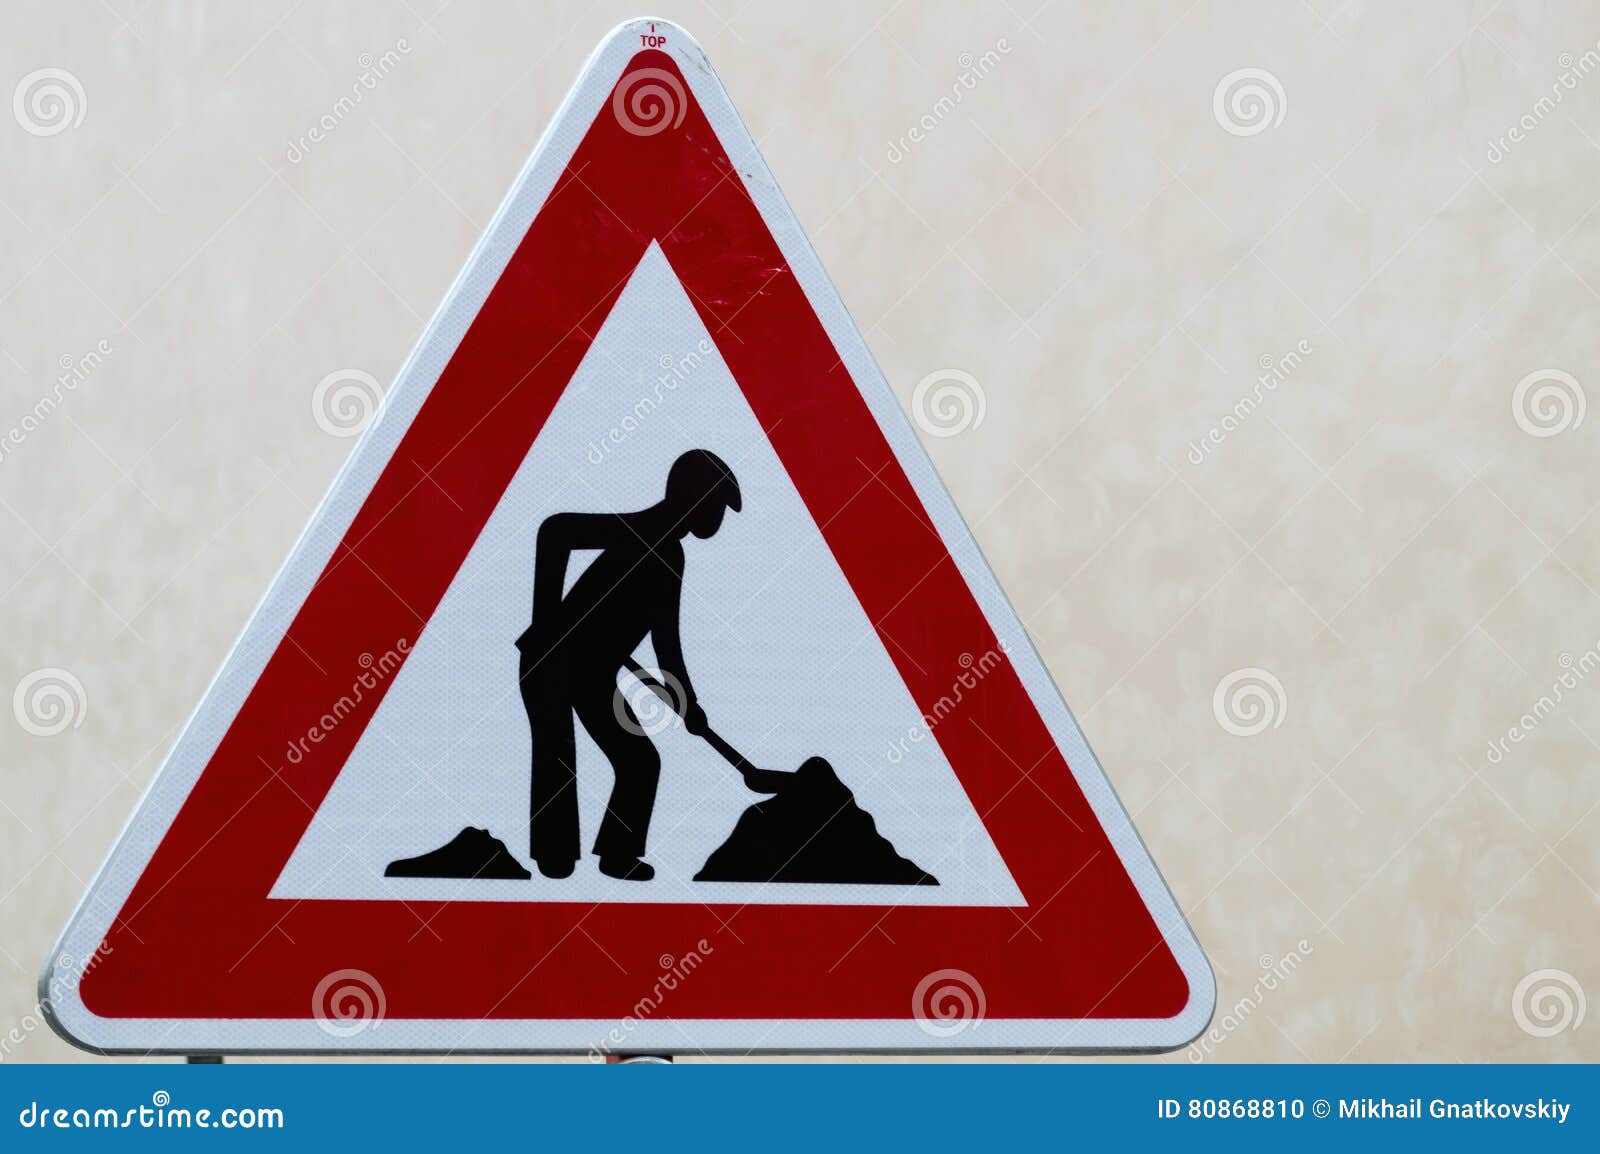 road works sign for construction works in street